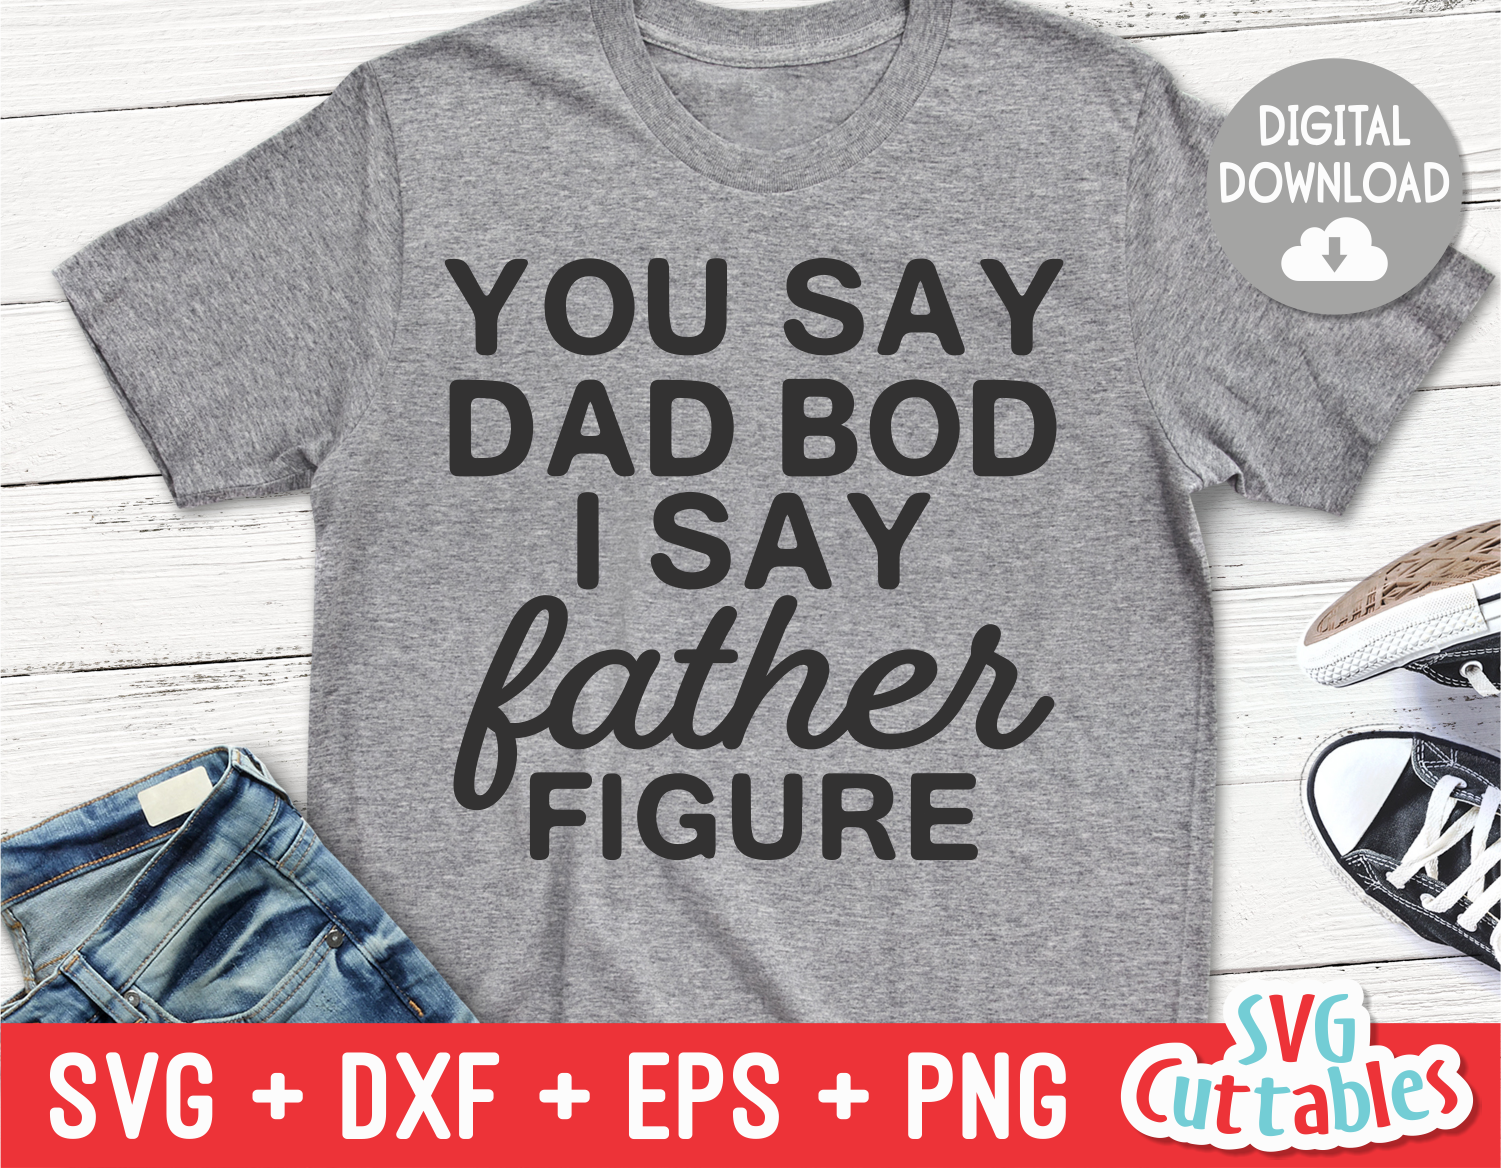 Download You Say Dad Bod I Say Father Figure Father S Day Svg Cut File Svgcuttablefiles